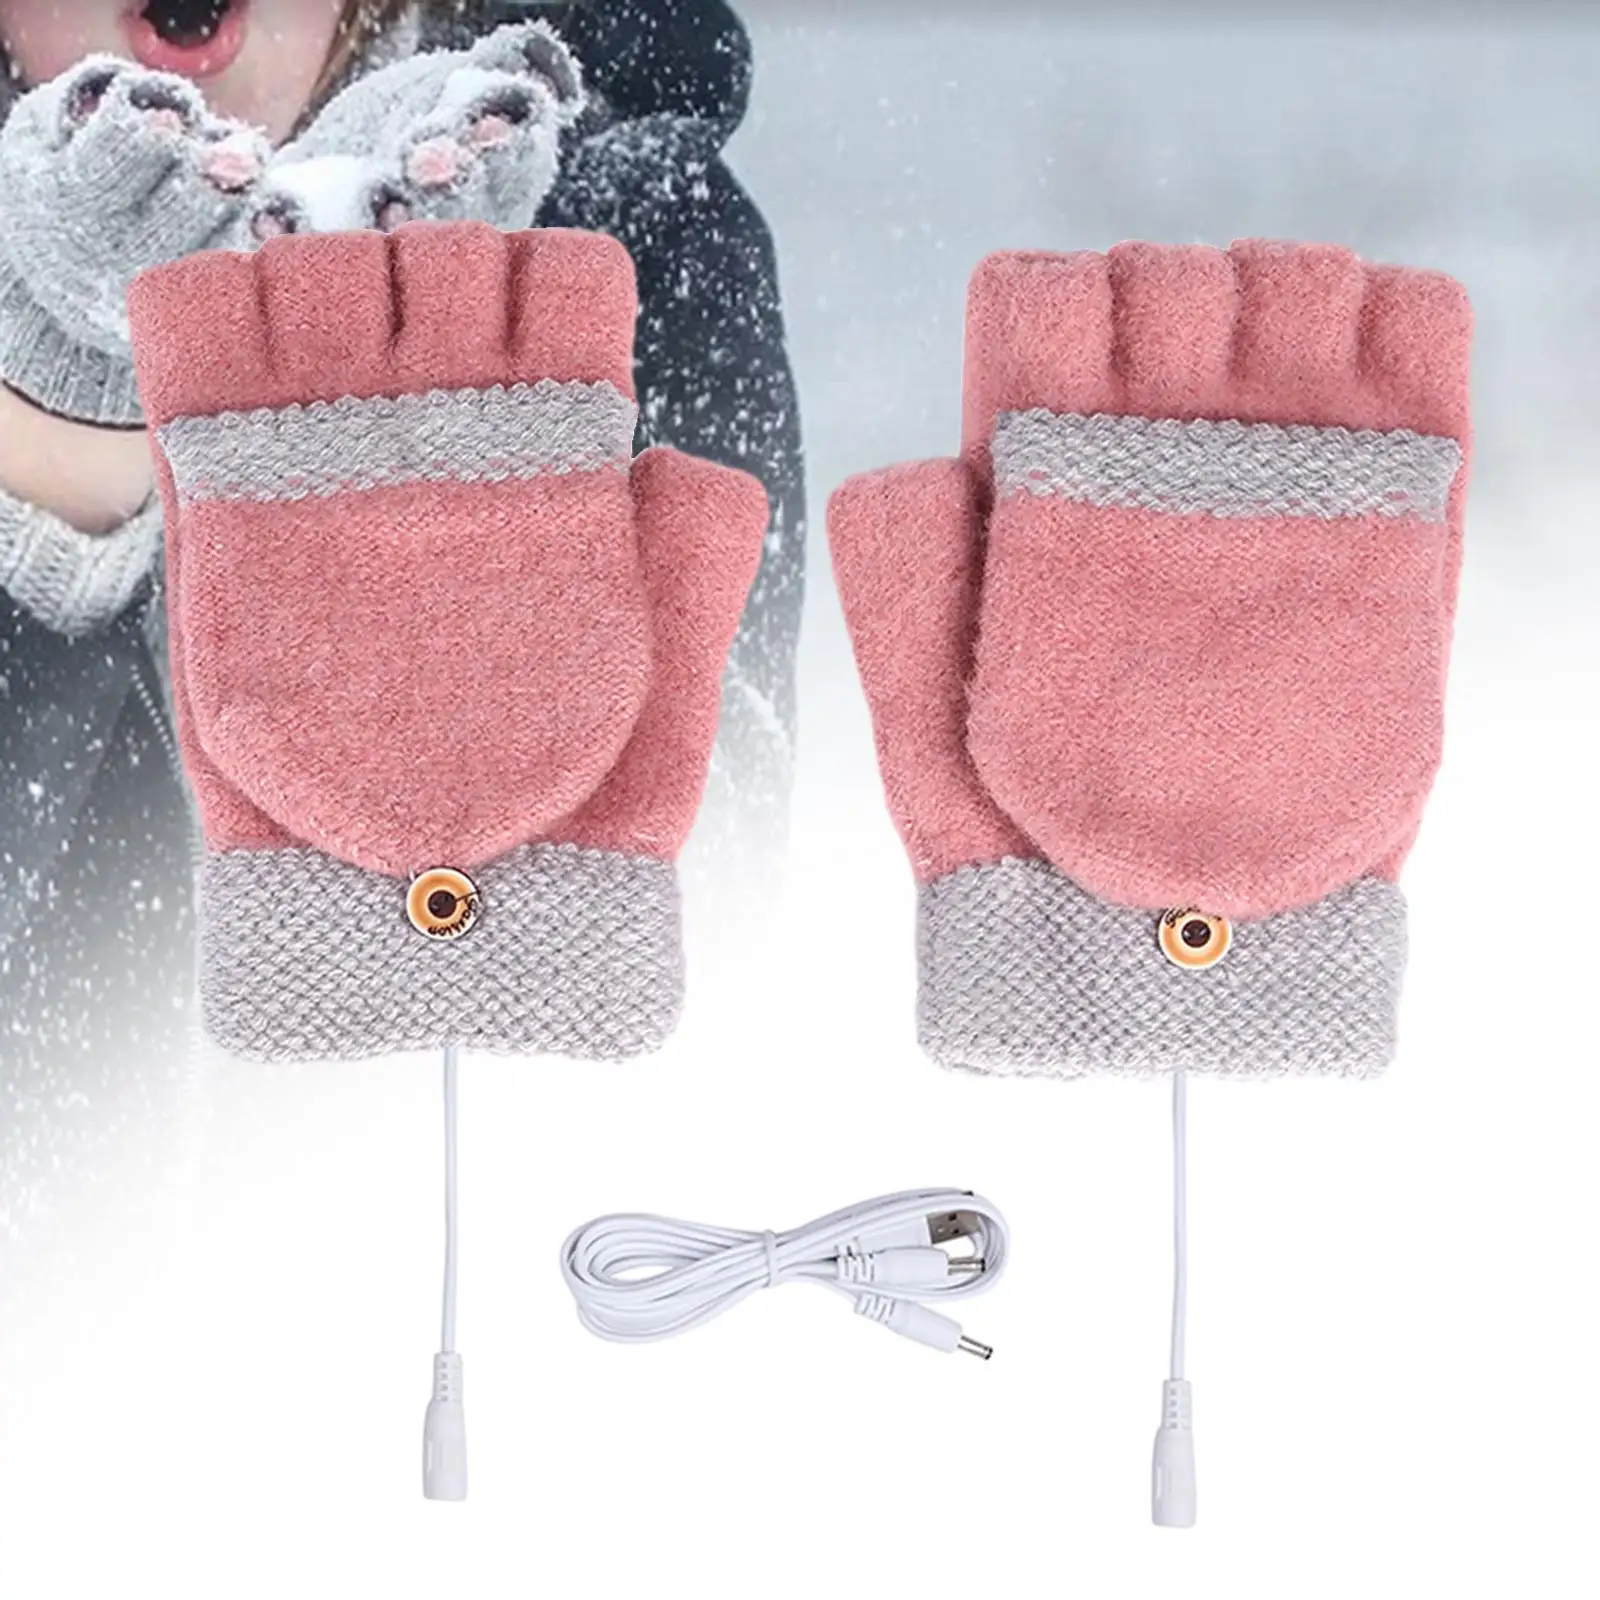 Electric Heated Gloves for Women Heating Mittens Fingerless Gloves Heating Gloves Hands Warmer for Sports Hiking Indoor